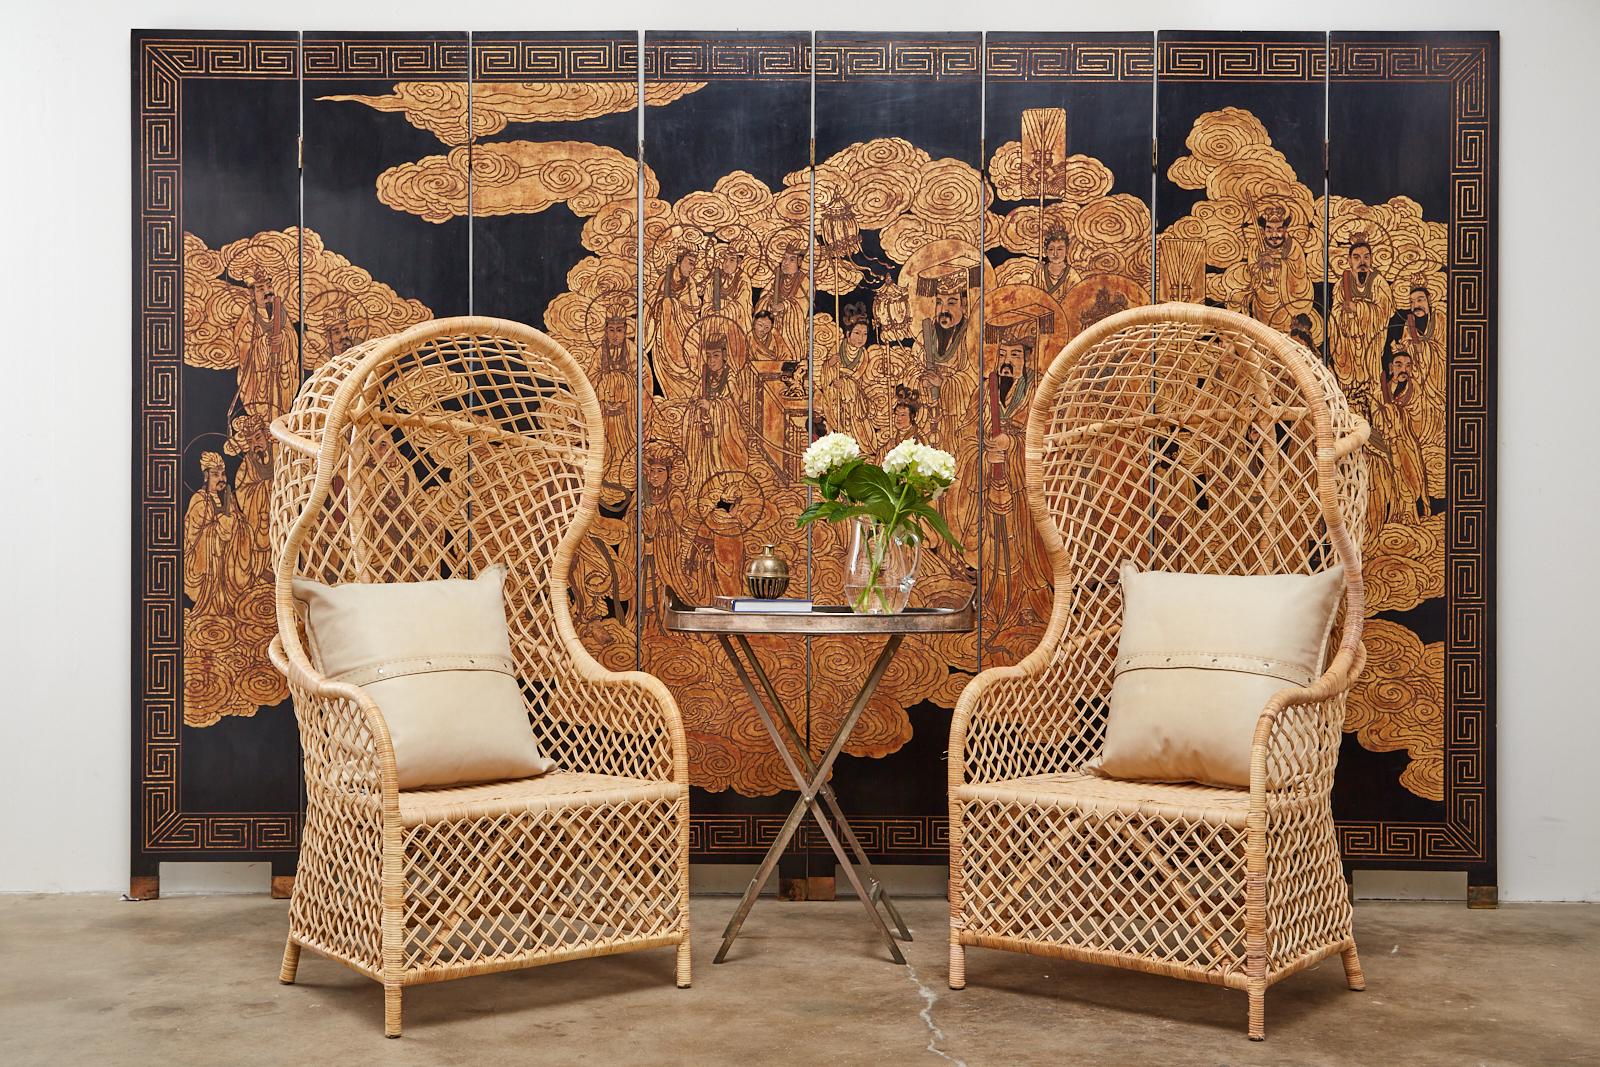 Amazing Chinese export eight-panel lacquered coromandel screen depicting a heavenly scene of immortals and sky gods floating in ruyi clouds. The fascinating scene is crafted in dramatic gold leaf and gilt with a stylish Greek key pattern border